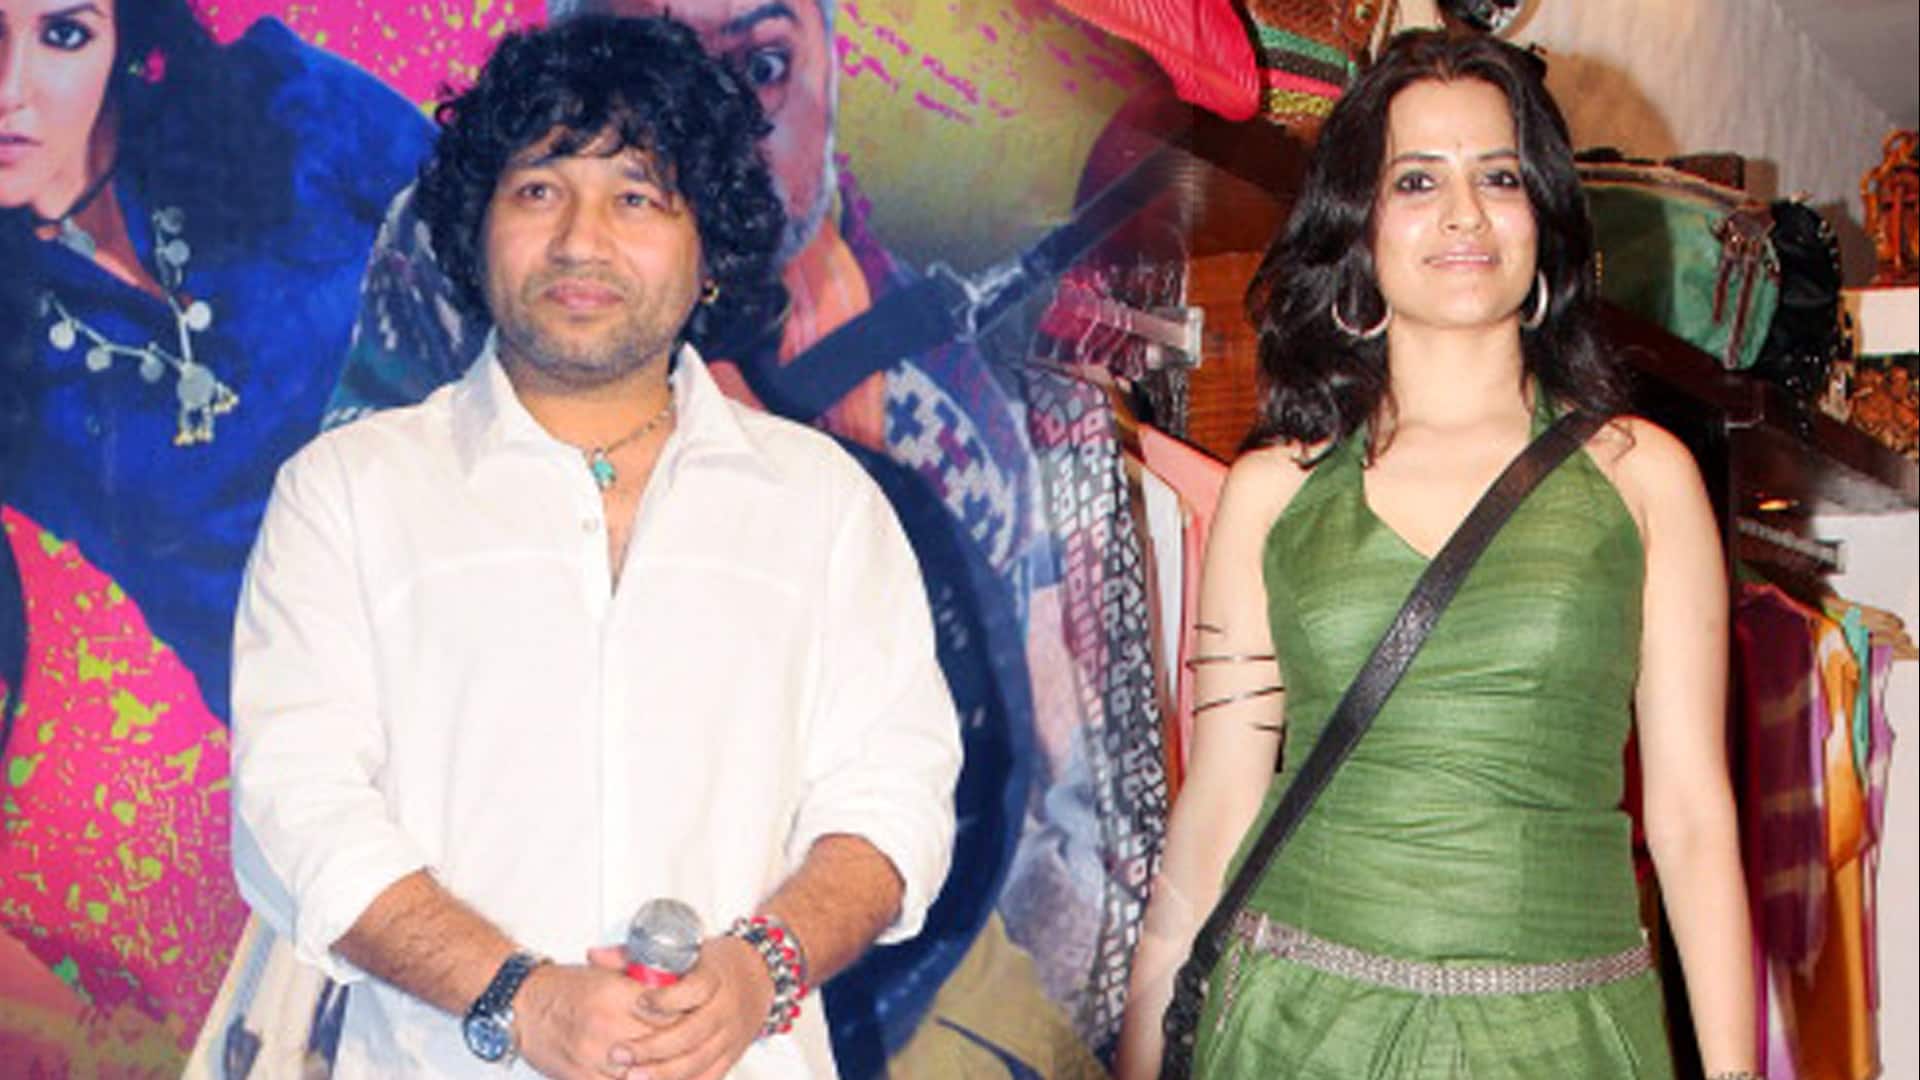 singer kailash kher accused by sona mohapatra on sexual assault